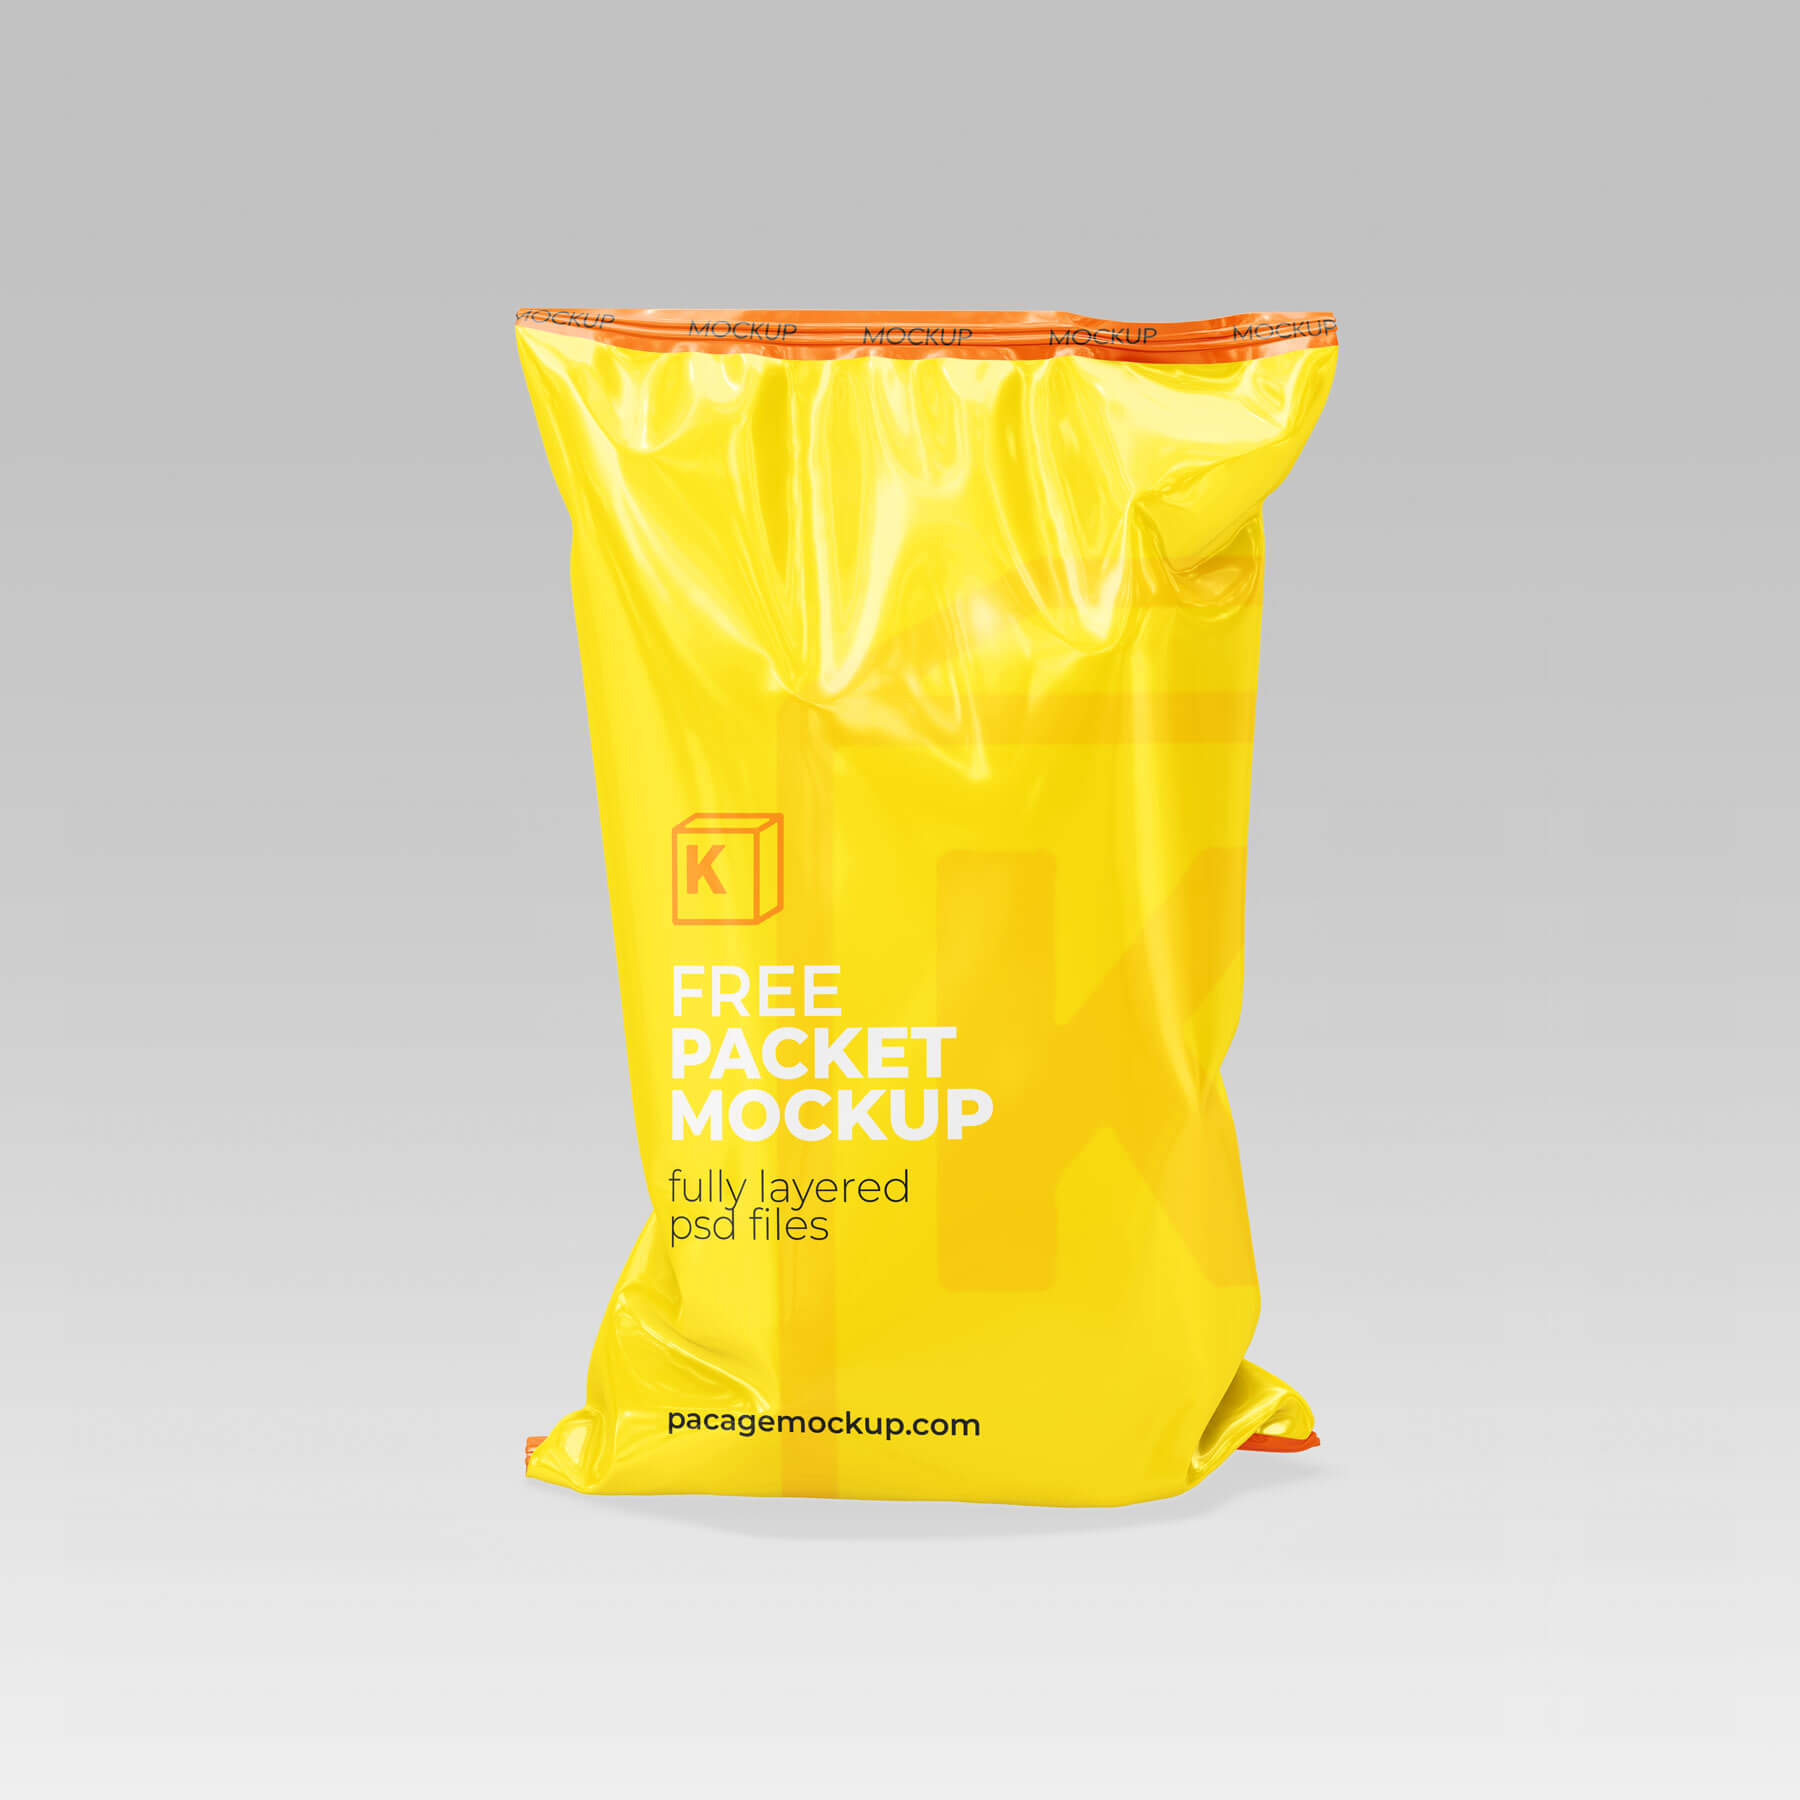 Free Brand Food and Chips Packet Mockup set